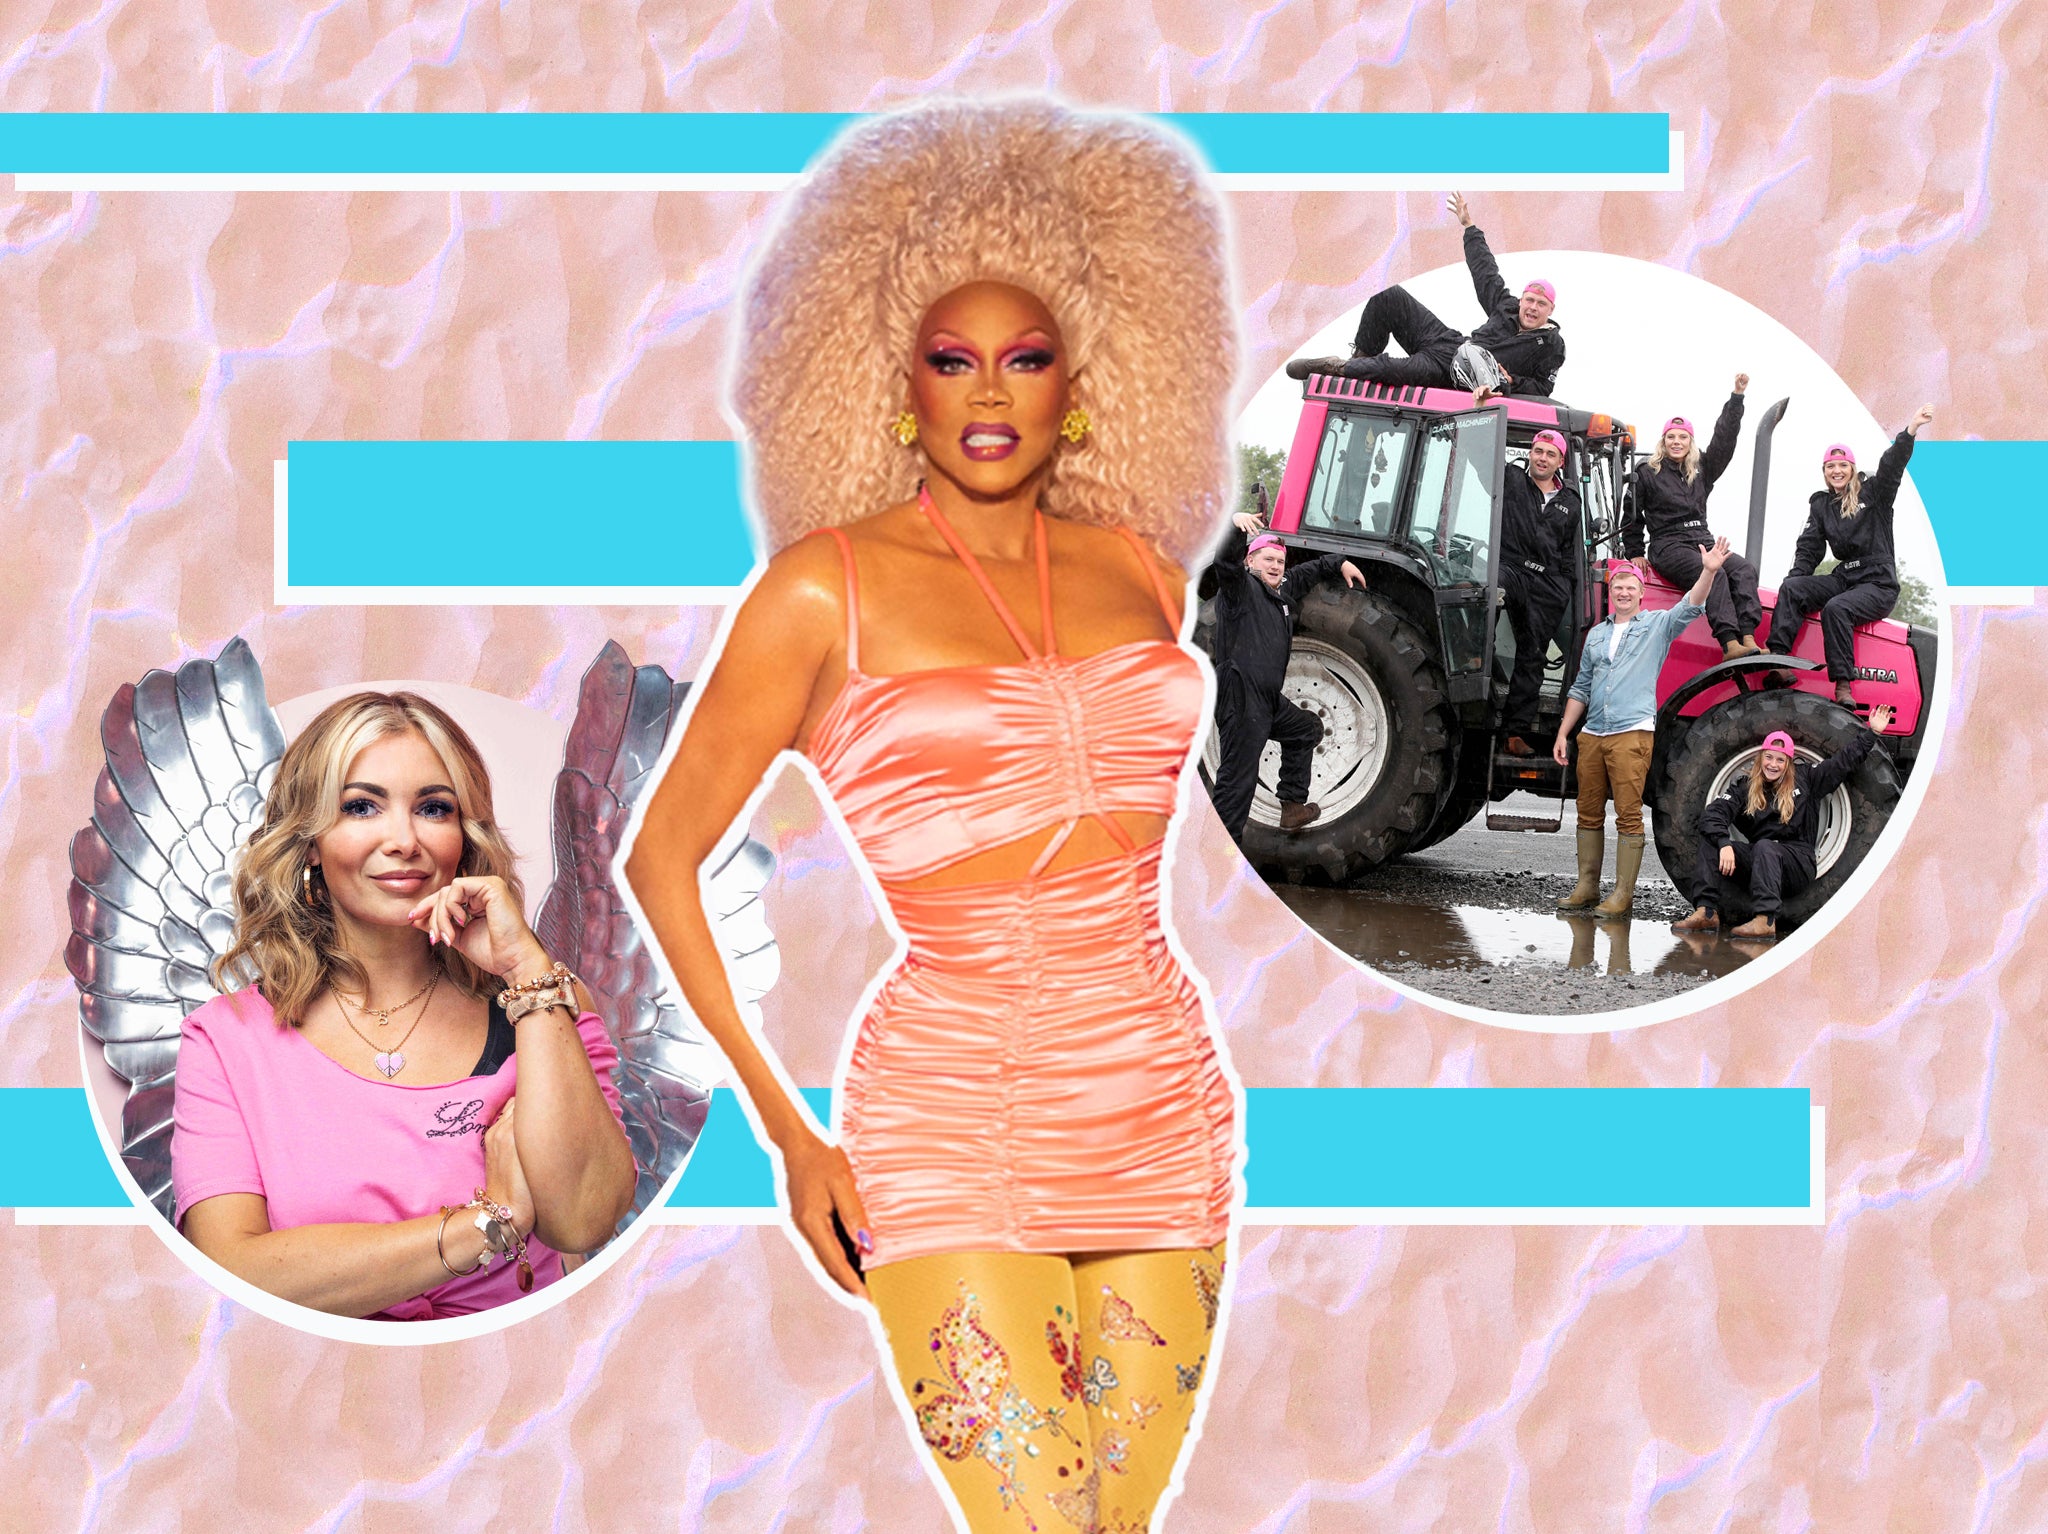 Three at last: ‘Angels of the North’, ‘RuPaul’s Drag Race UK Versus the World’ and ‘The Fast and the Farmerish’ are among the series premiering on the channel following its return to the airwaves